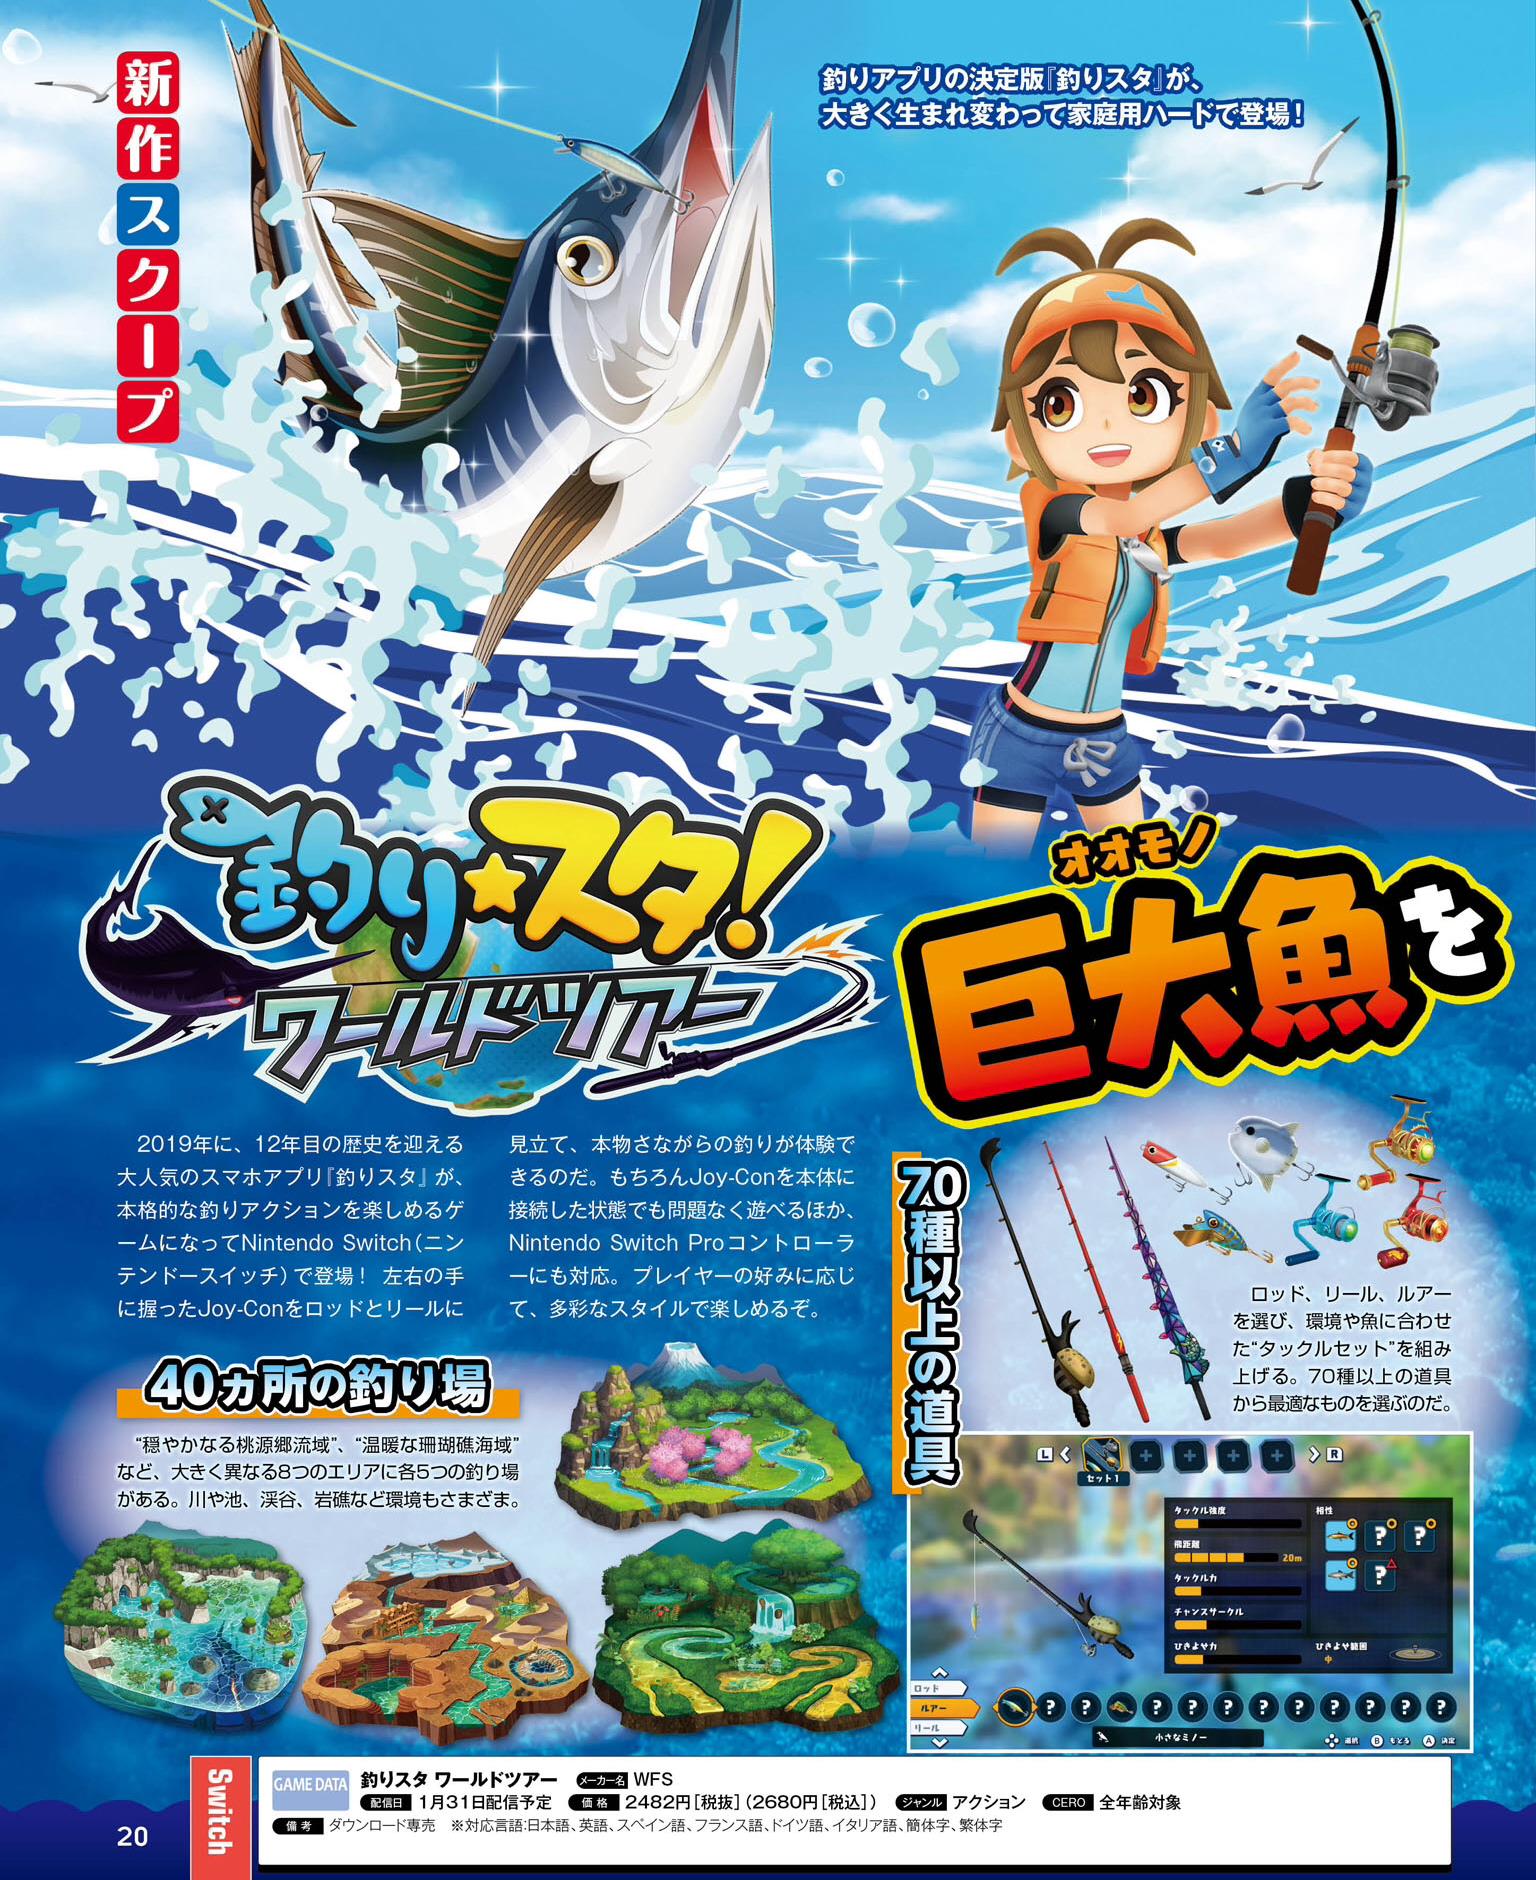 Scans roundup - Fishing Star, Blade Arcus Rebellion from Shining, more